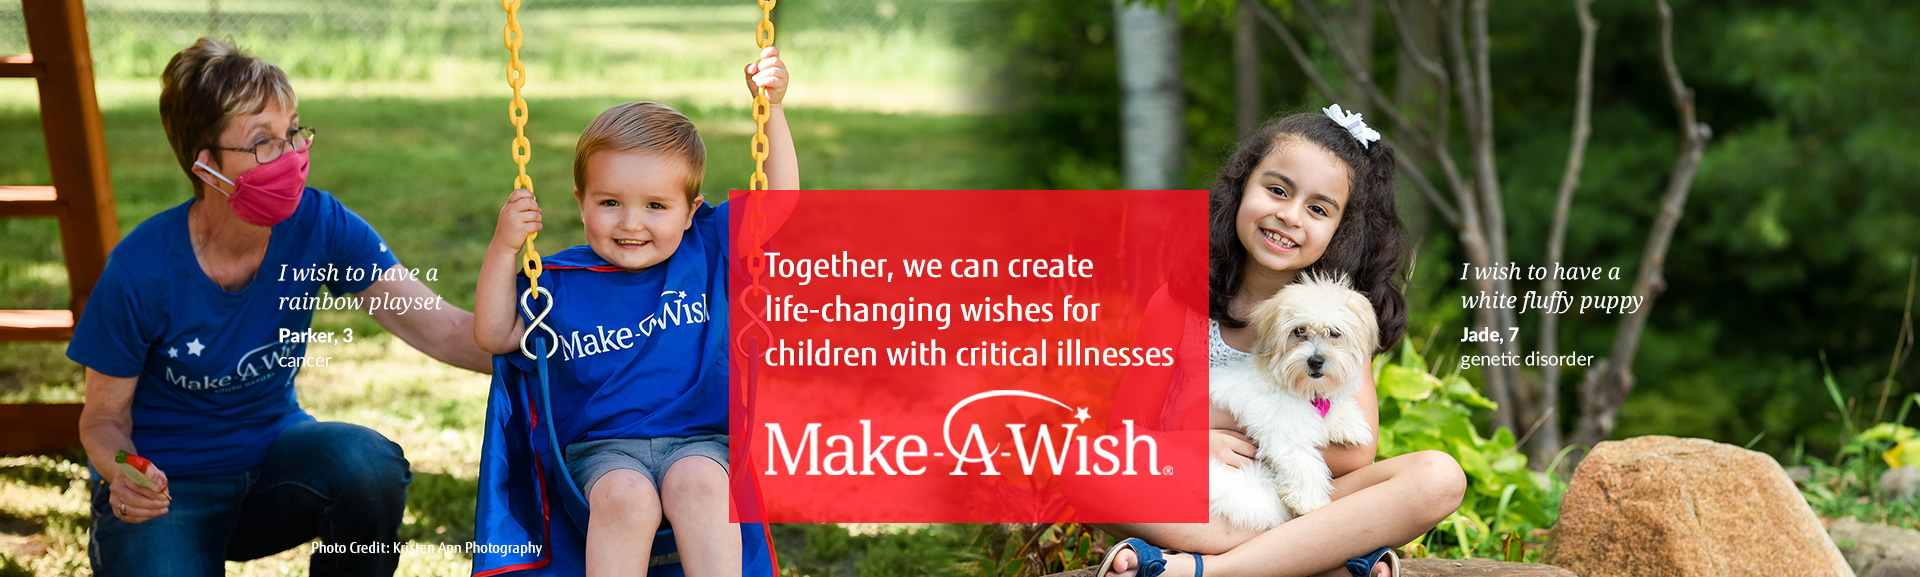 Together, we can create life-changing wishes for children with critical illnesses Make-A-Wish® 